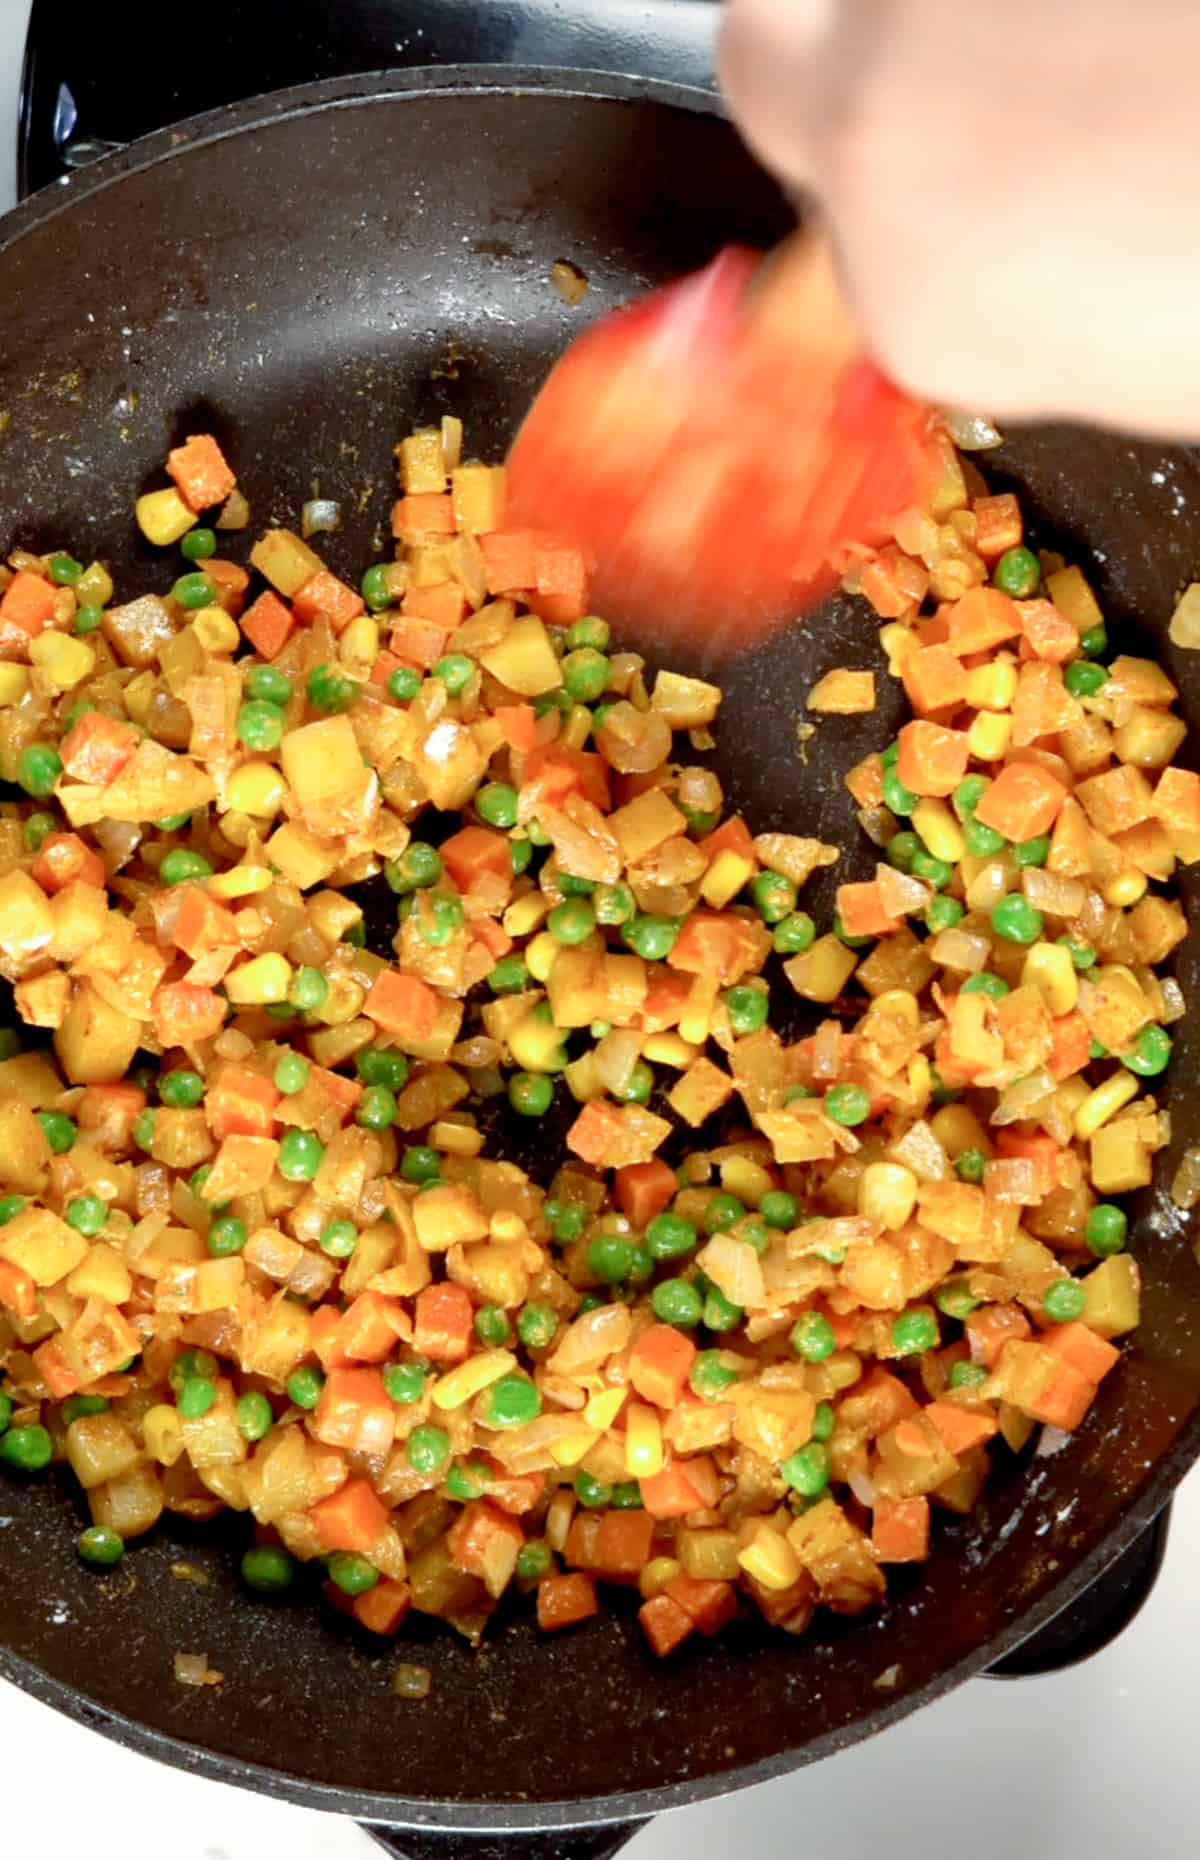 frying carrots, peas, and corn in a black fry pan